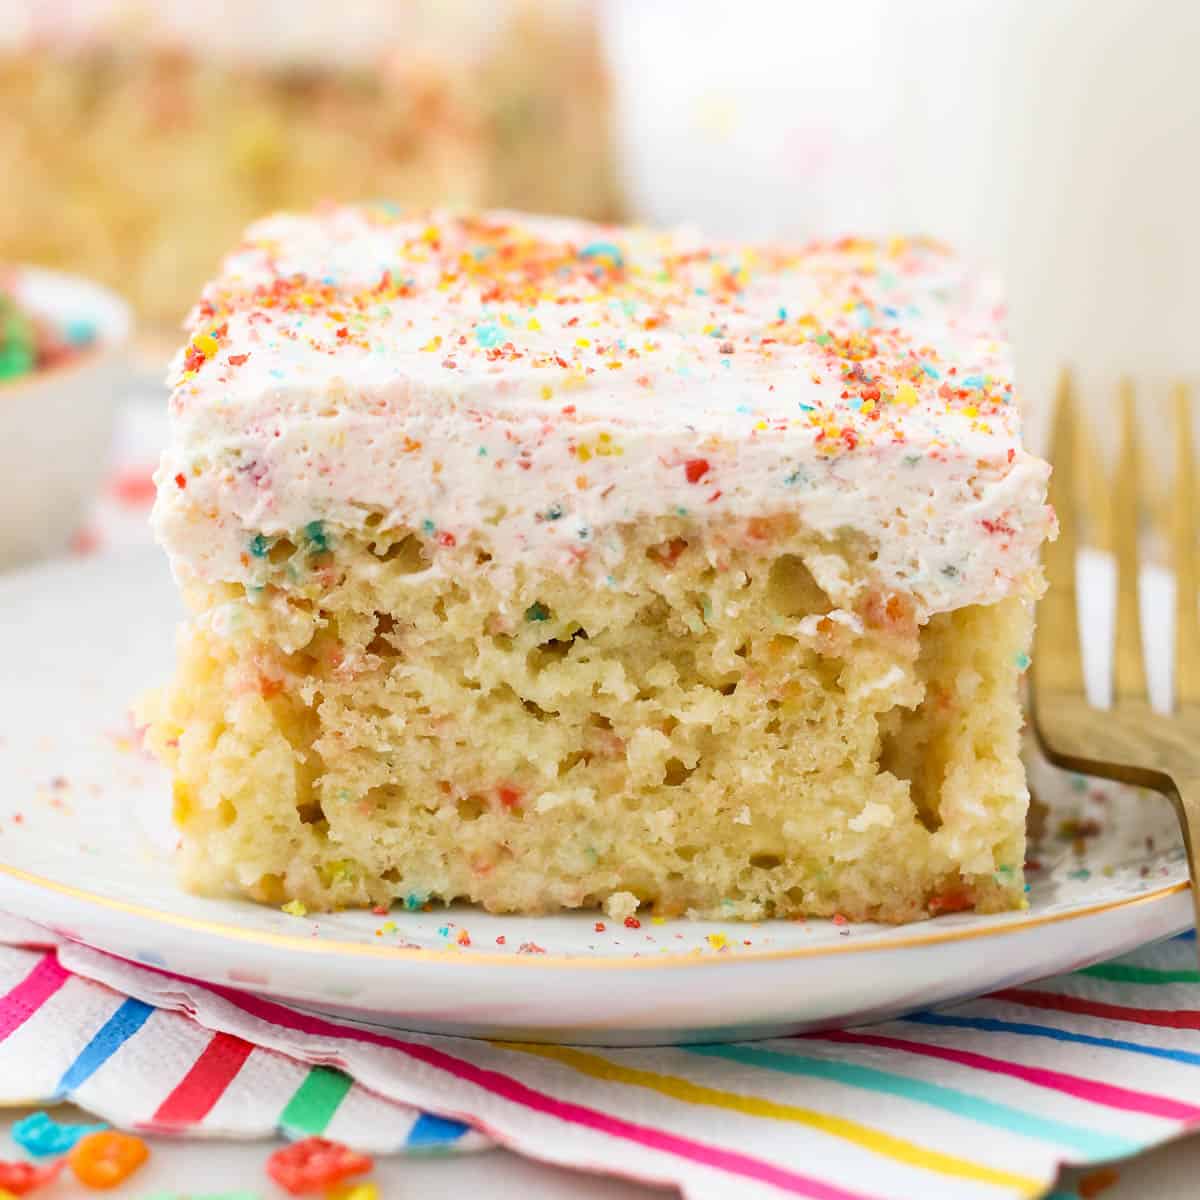 Fruity Pebble Cereal Milk Poke Cake Is Easy To Make & So Delicious!